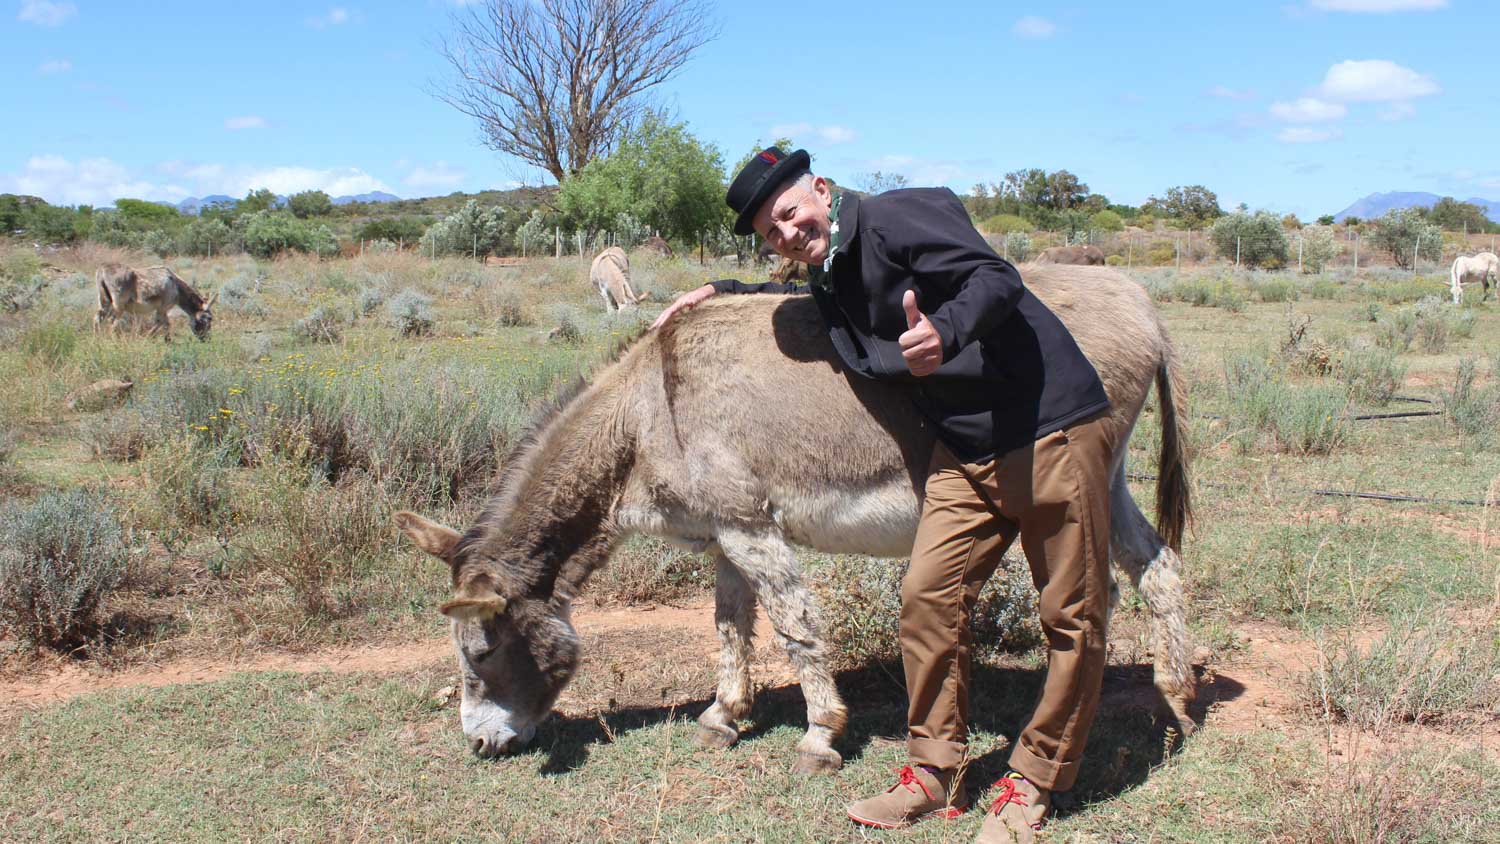 David Kramer is the Patron of Eseltjiesrus. Here he is giving huggs to one of the rescued donkeys 2